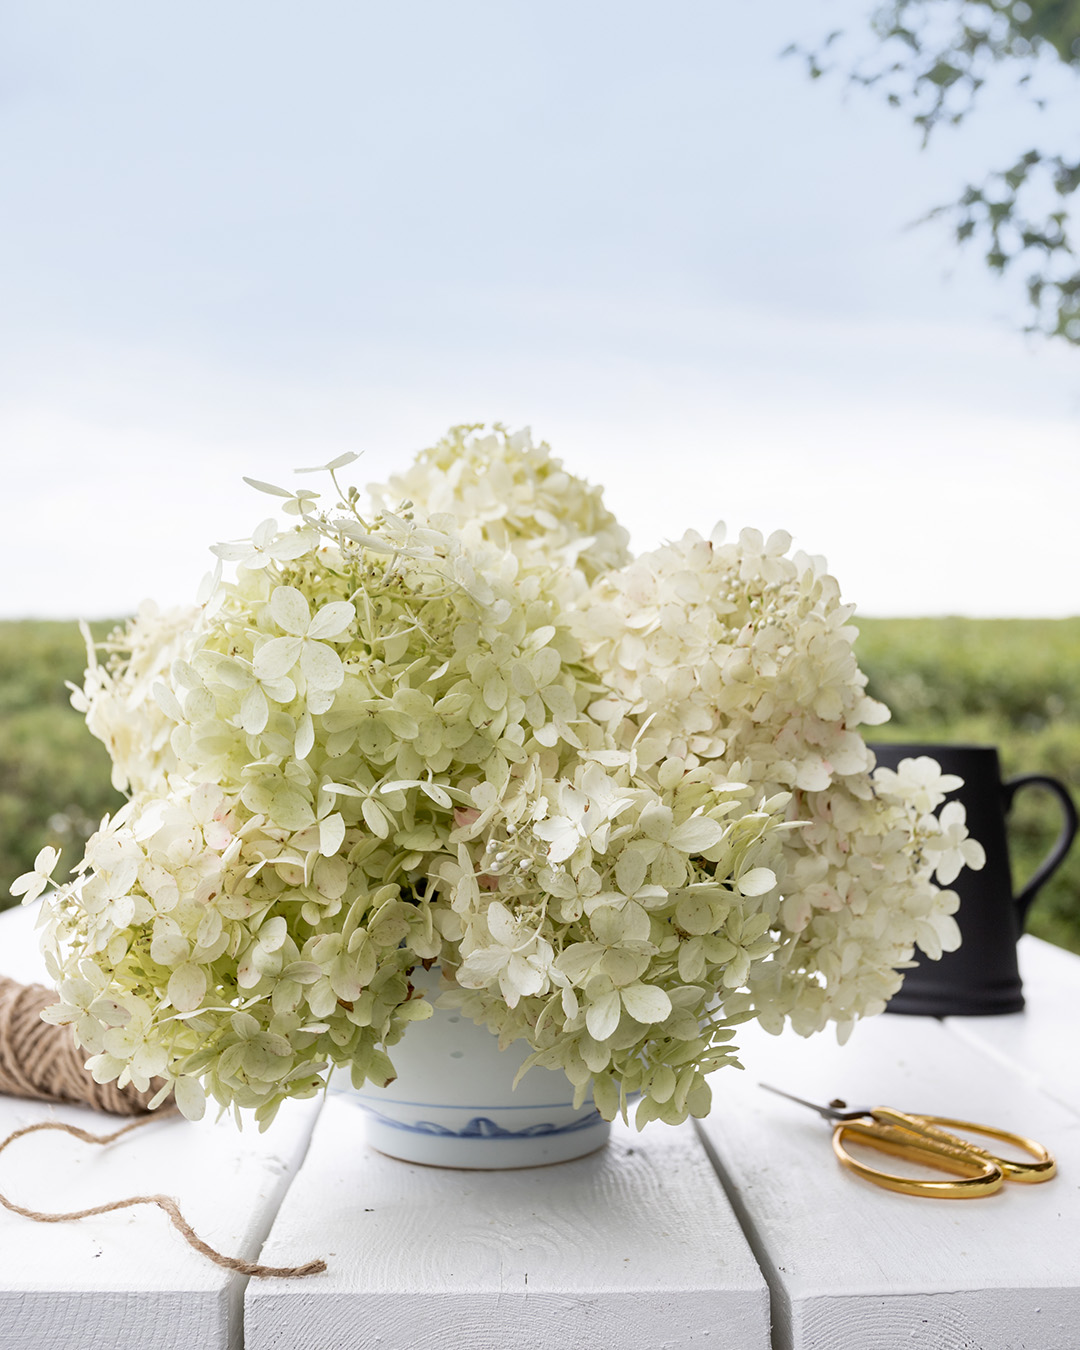 I love the hydrangeas that bloom here in late summer and early fall! Here's how to make a really beautiful and simple hydrangea bowl arrangement.